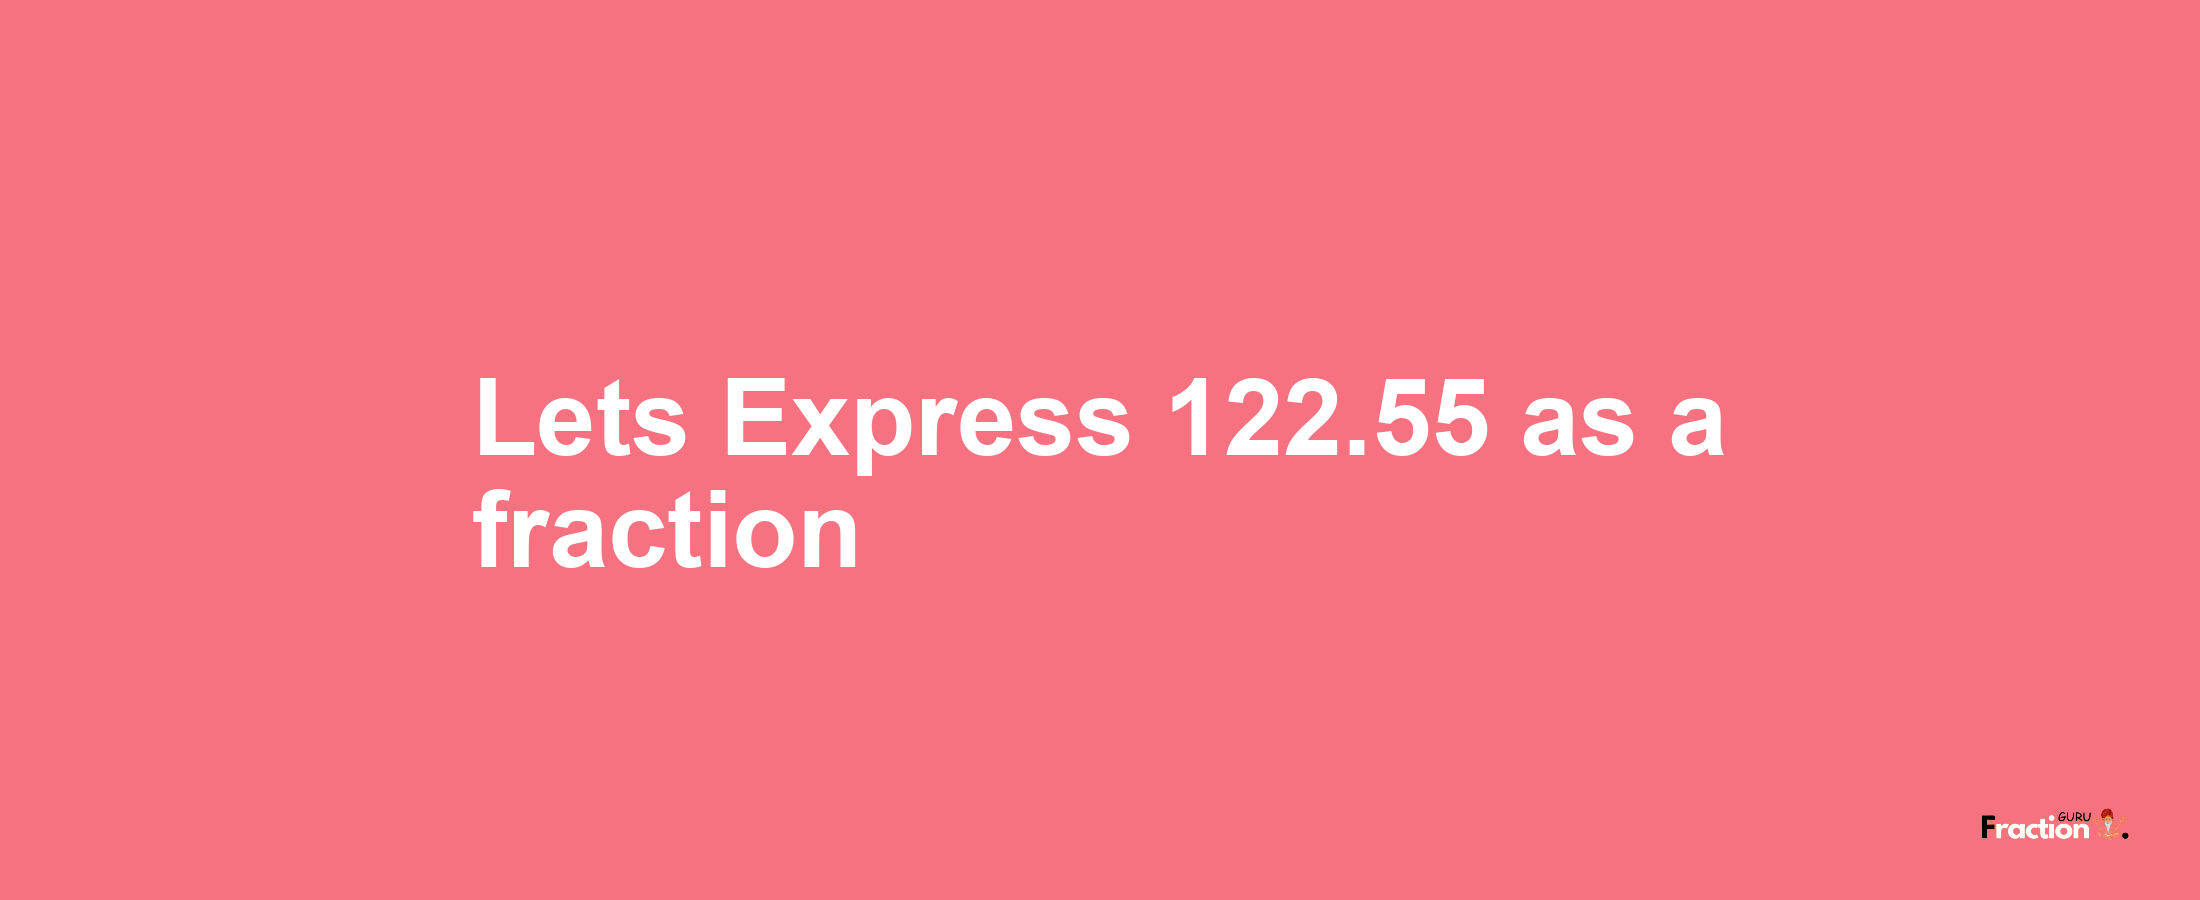 Lets Express 122.55 as afraction